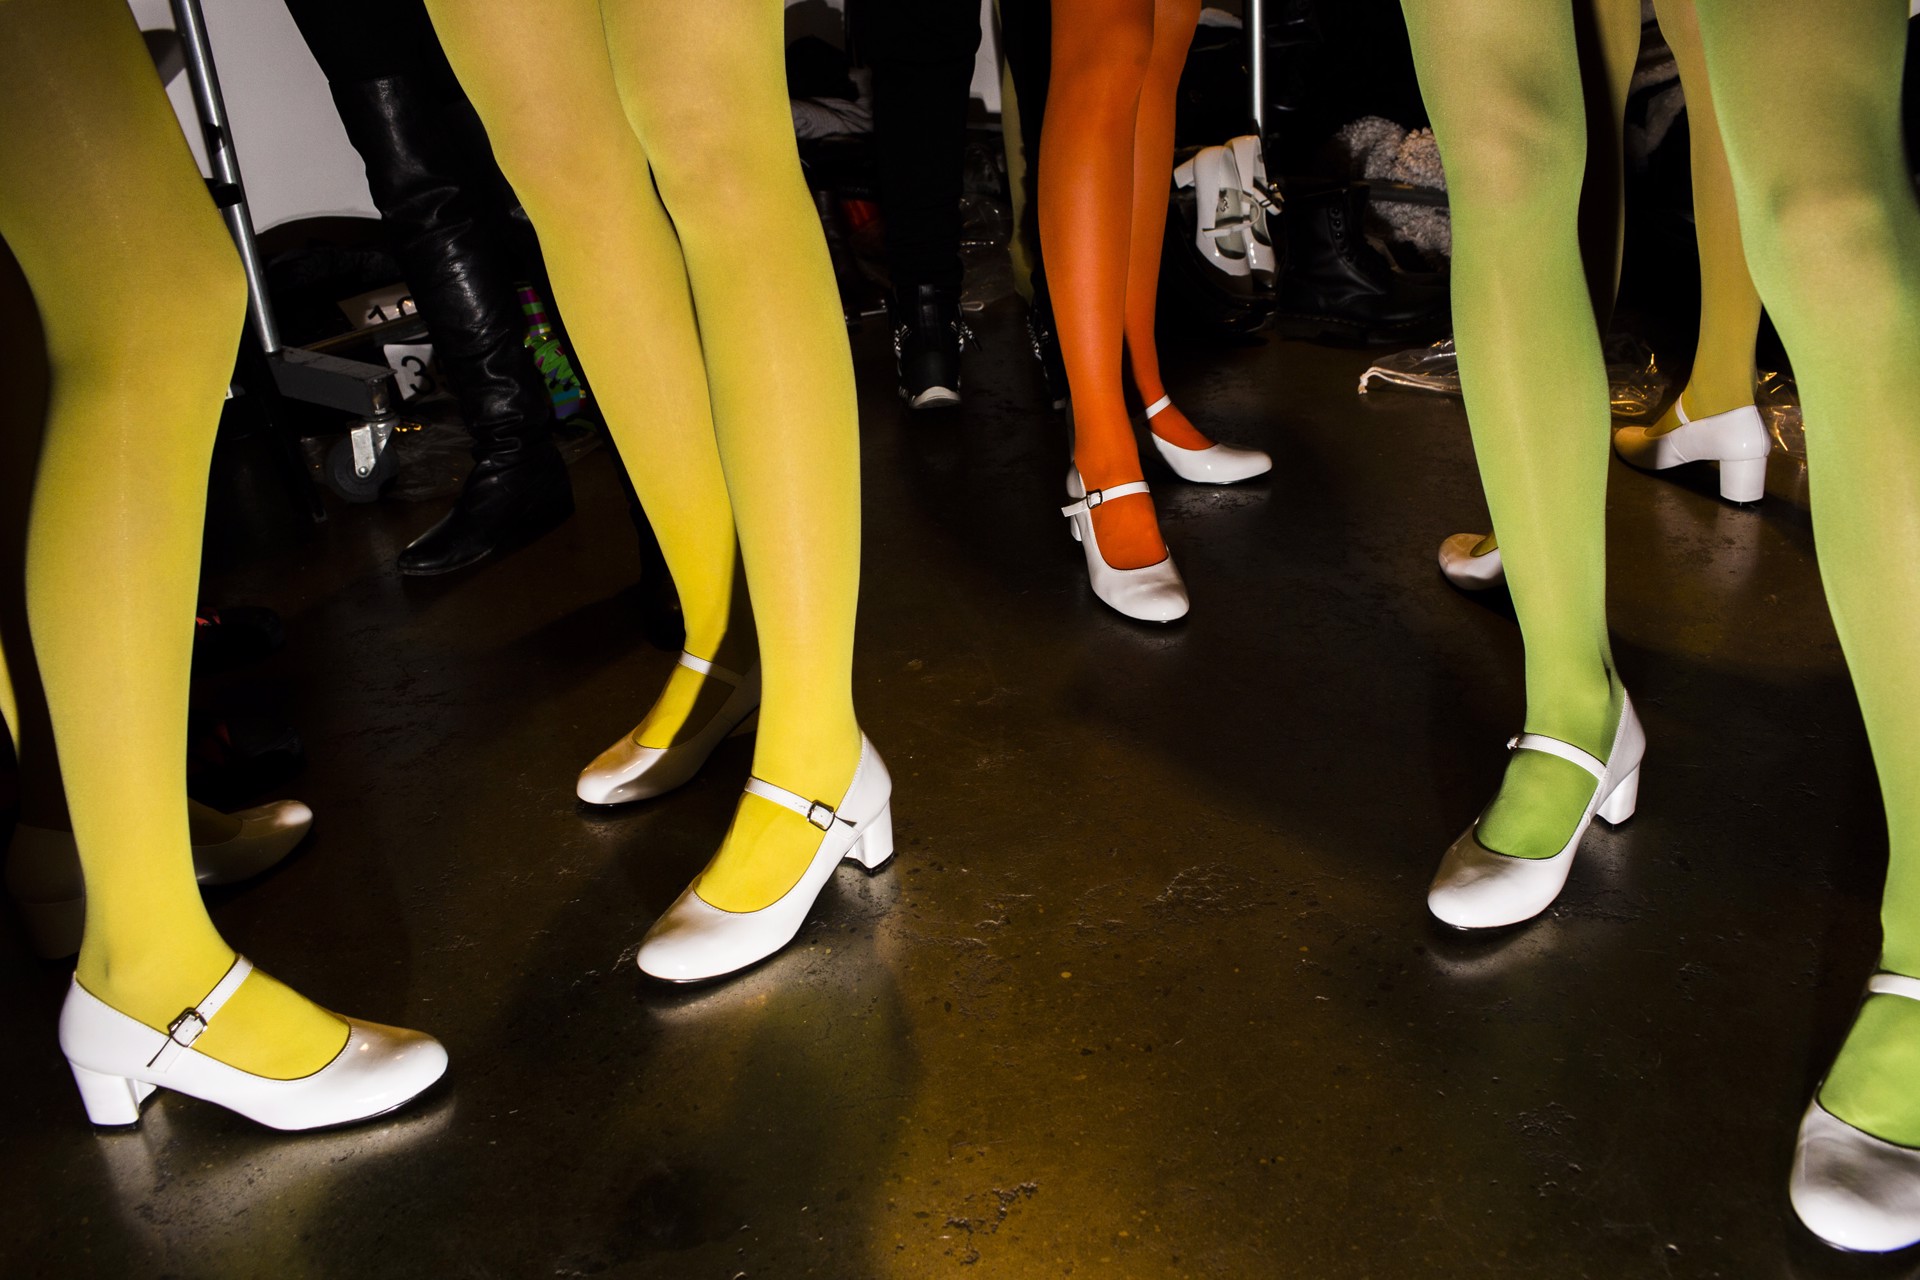 Backstage at Jeremy Scott (with colored tights), Out of Fashion series, NYC by Landon Nordeman